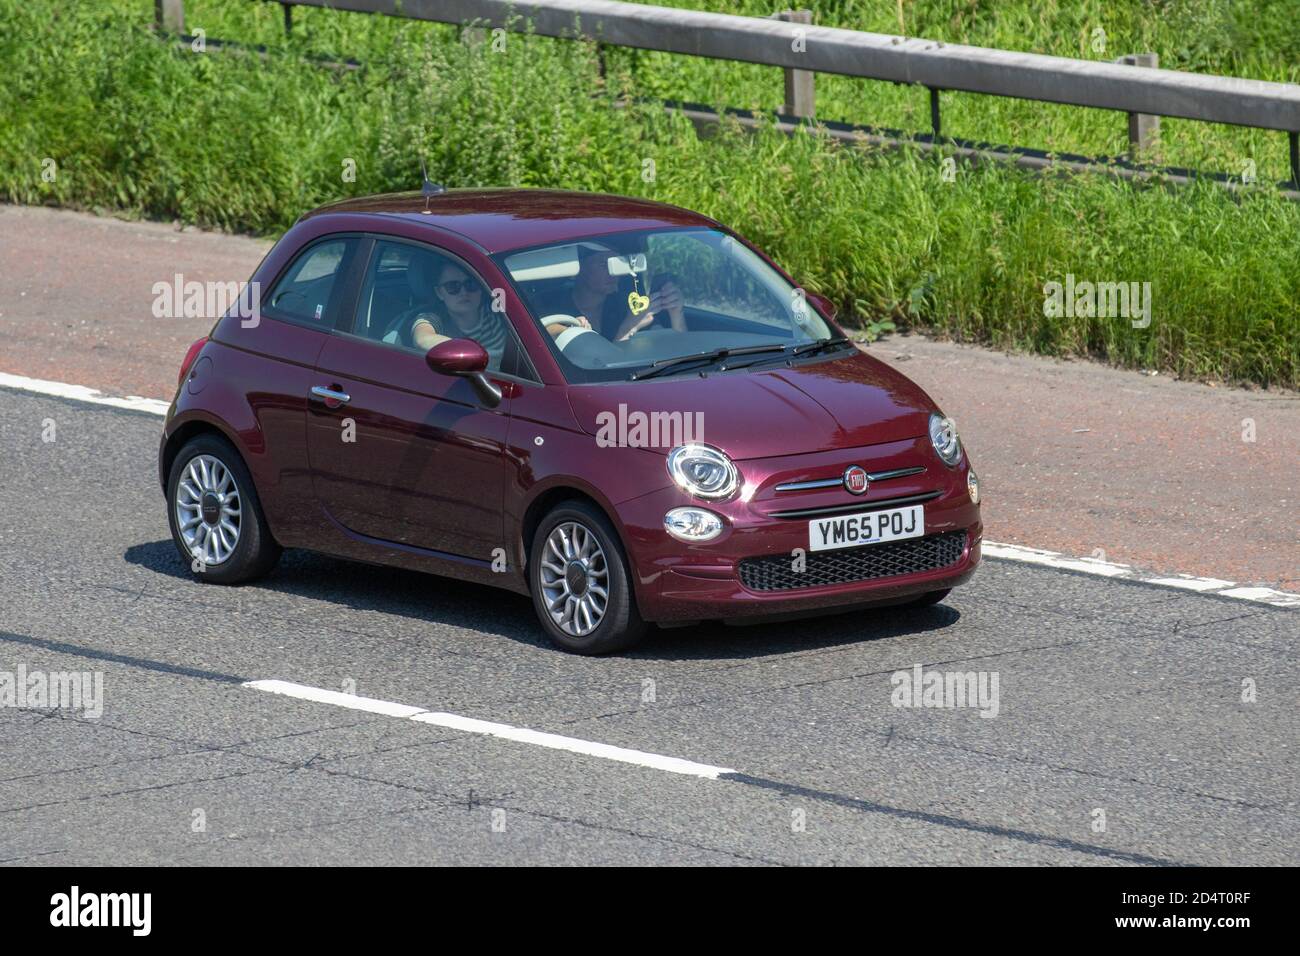 2016 red Fiat 500 POP Star; Vehicular traffic, moving vehicles, cars, vehicle driving on UK roads, motors, motoring on the M6 motorway highway UK road network. Stock Photo